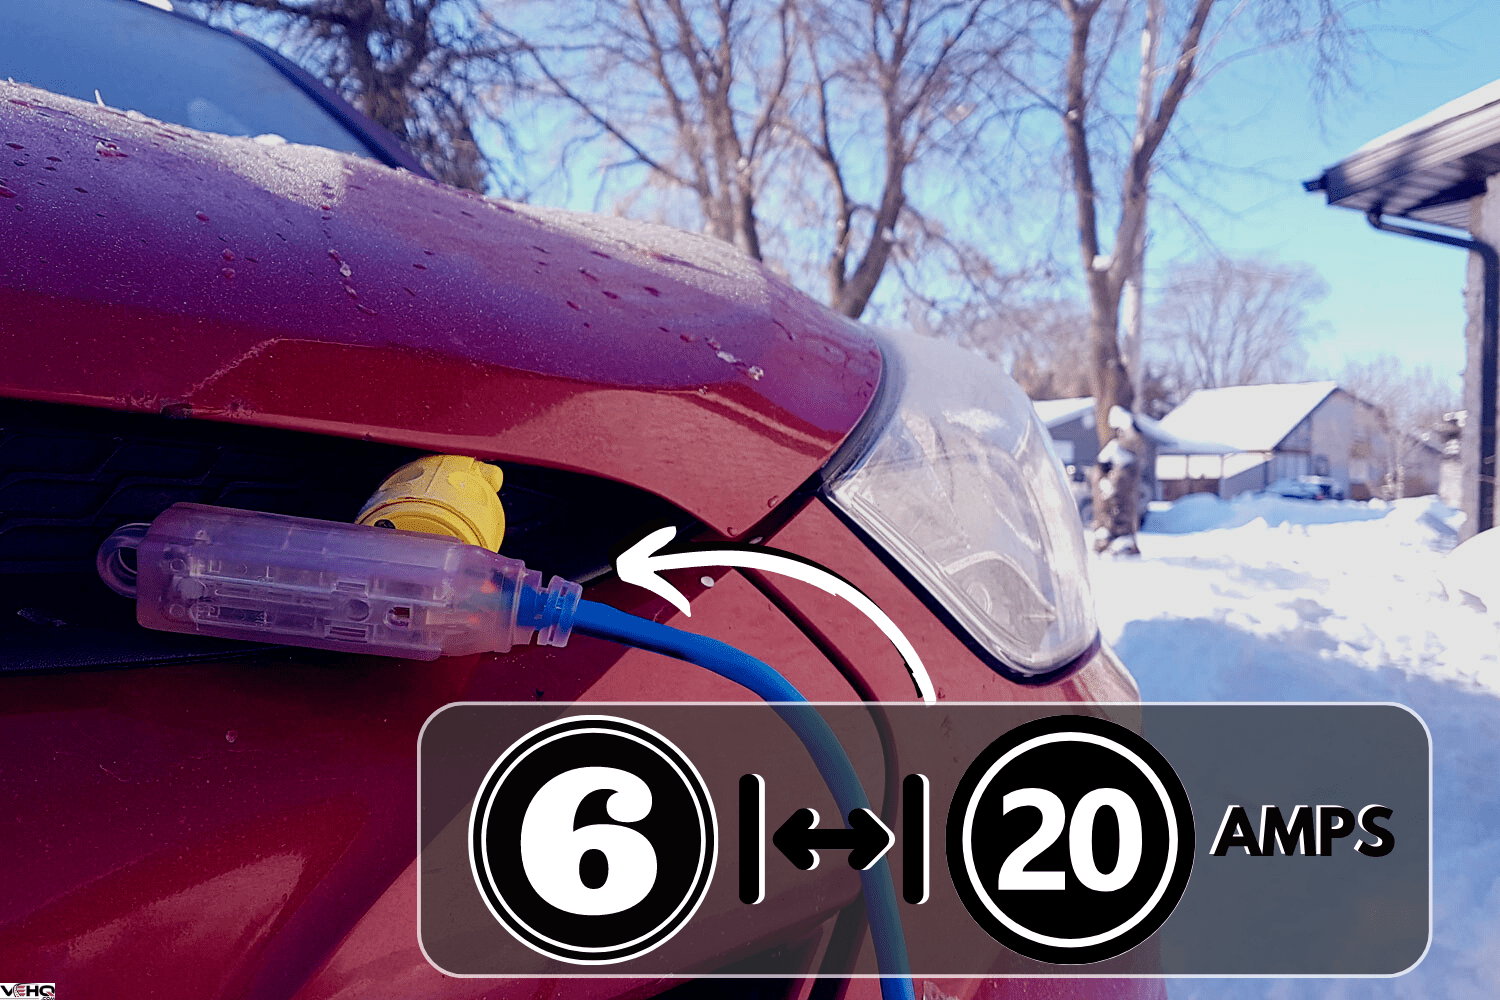 A block heater cable plugged into a vehicle parked in a snowy winter driveway, How Many Amps Does A Block Heater Draw?